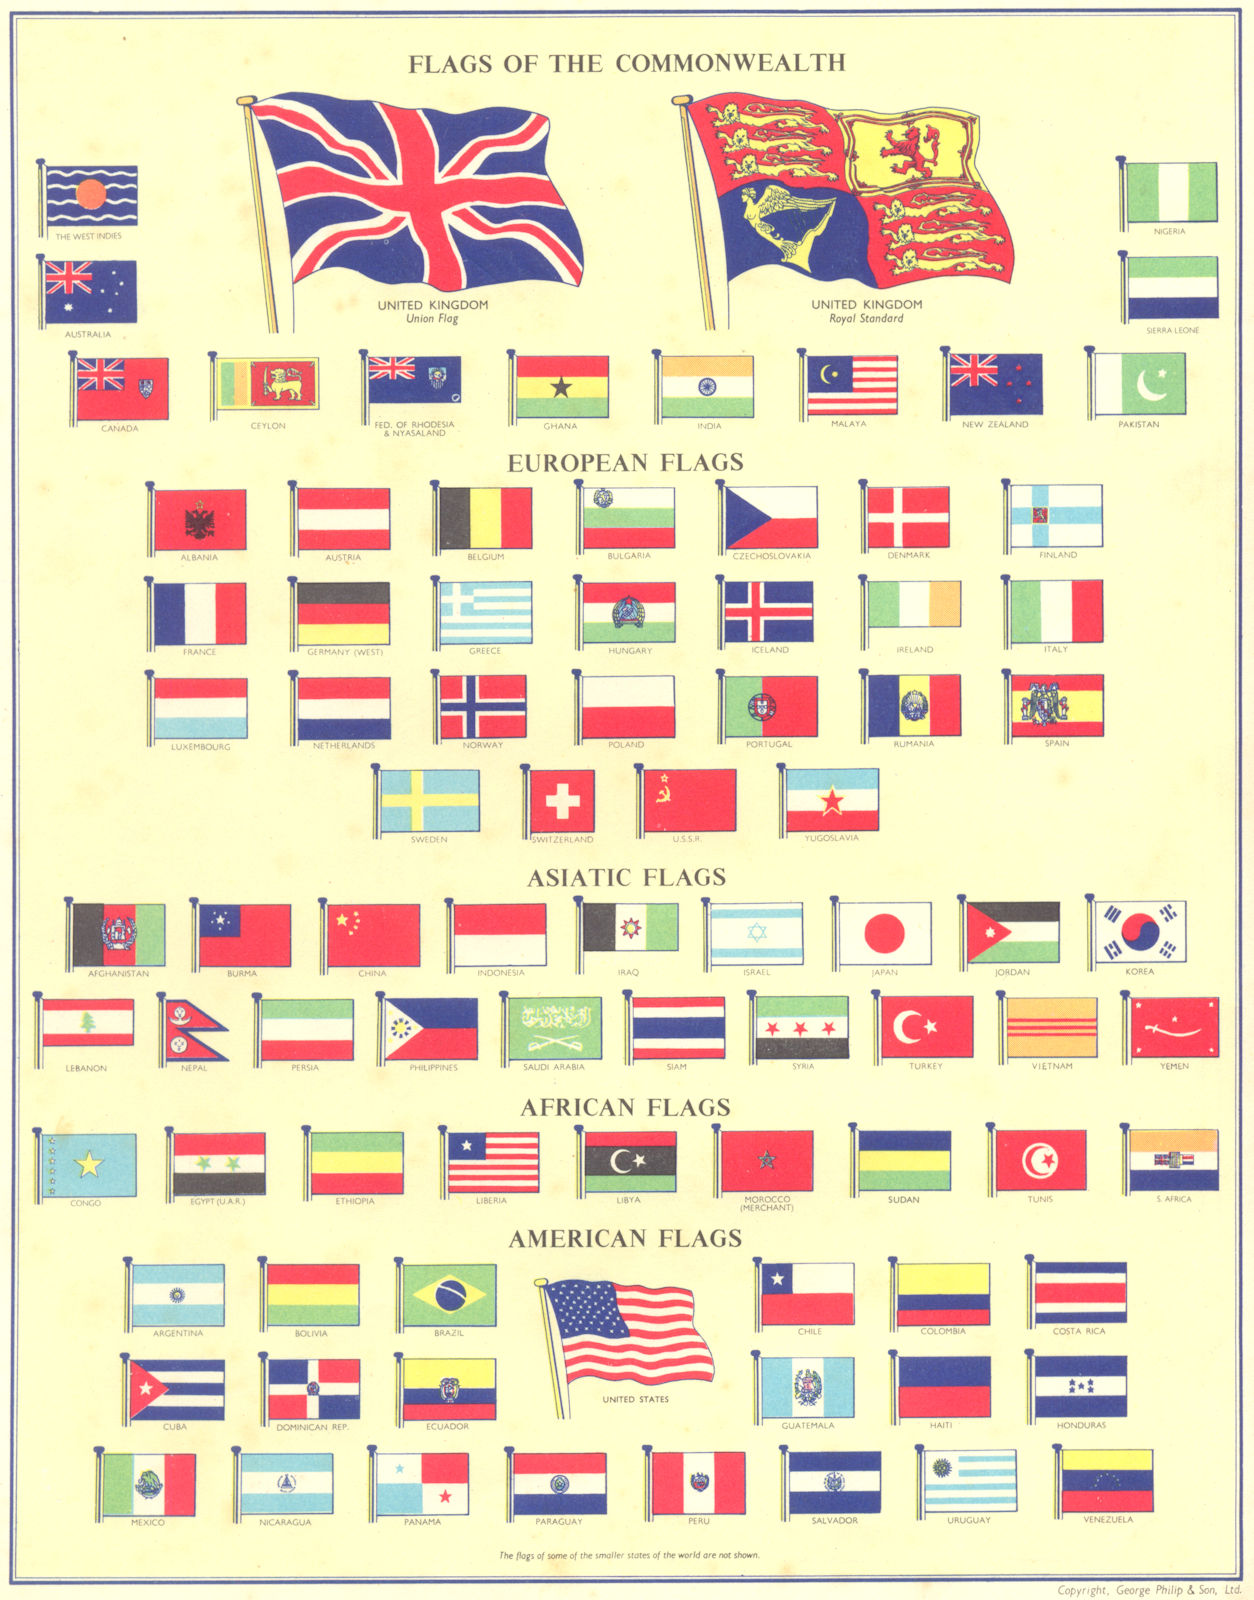 FLAGS. Commonwealth; European; Asiatic; African; American 1962 old vintage map